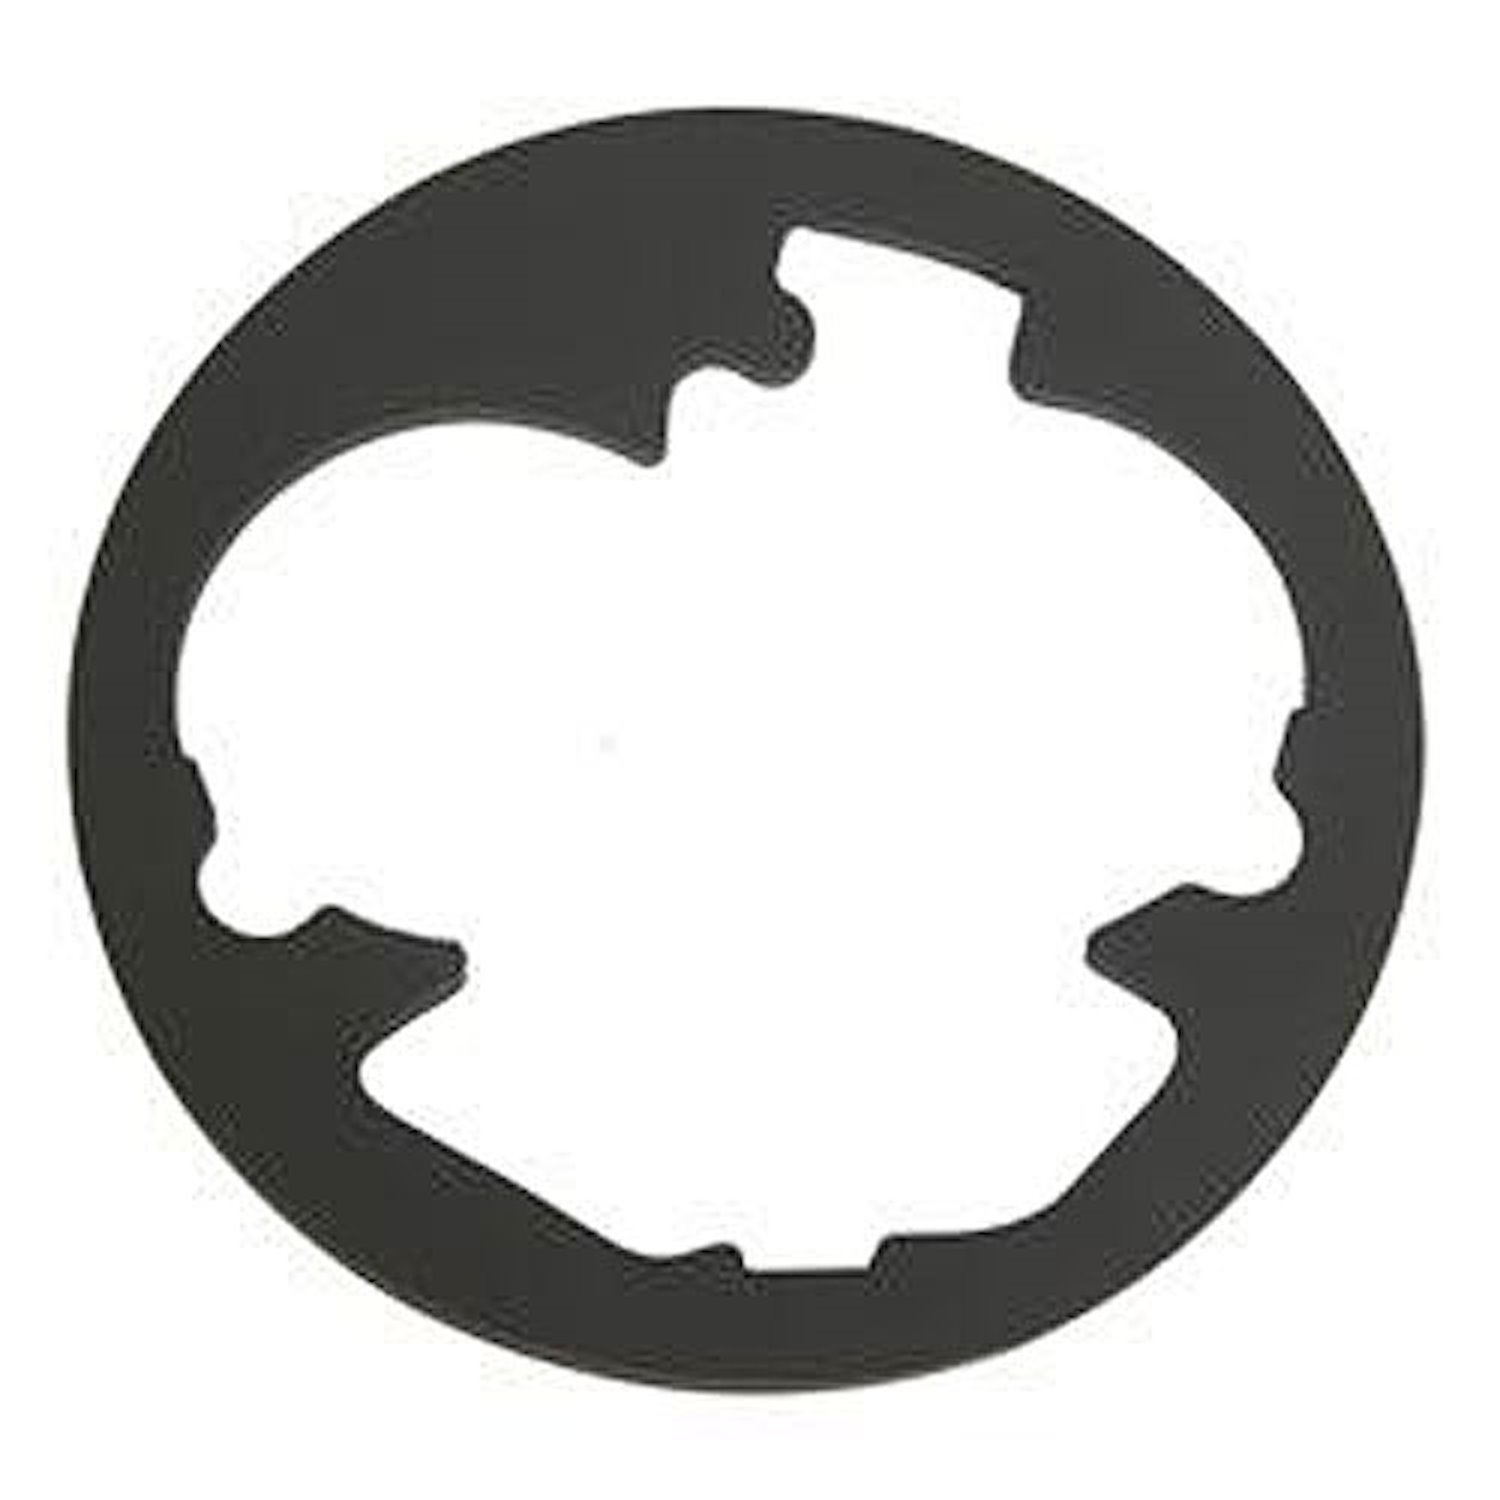 Replacement Gasket For K&N Air Intake System 599-57-3027